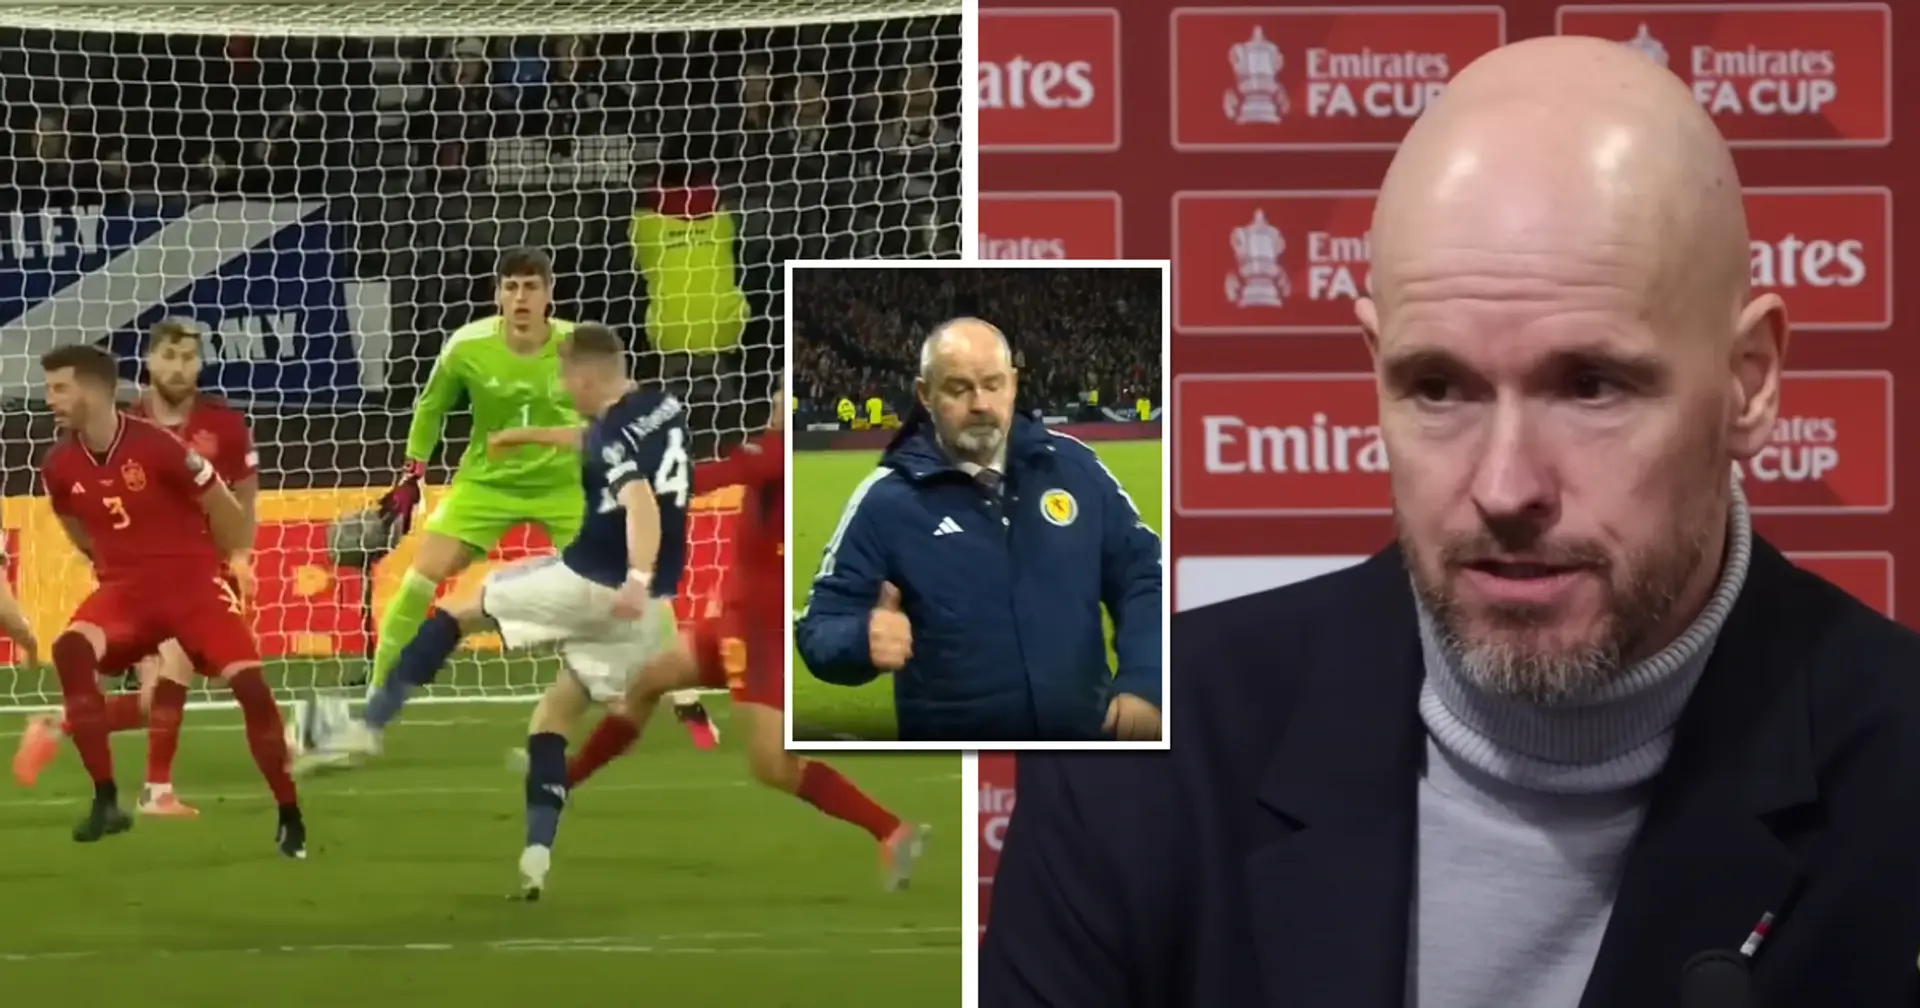 'Be rude not to try it': United fans want Ten Hag to swap positions of 2 players— joke's spinning out of control